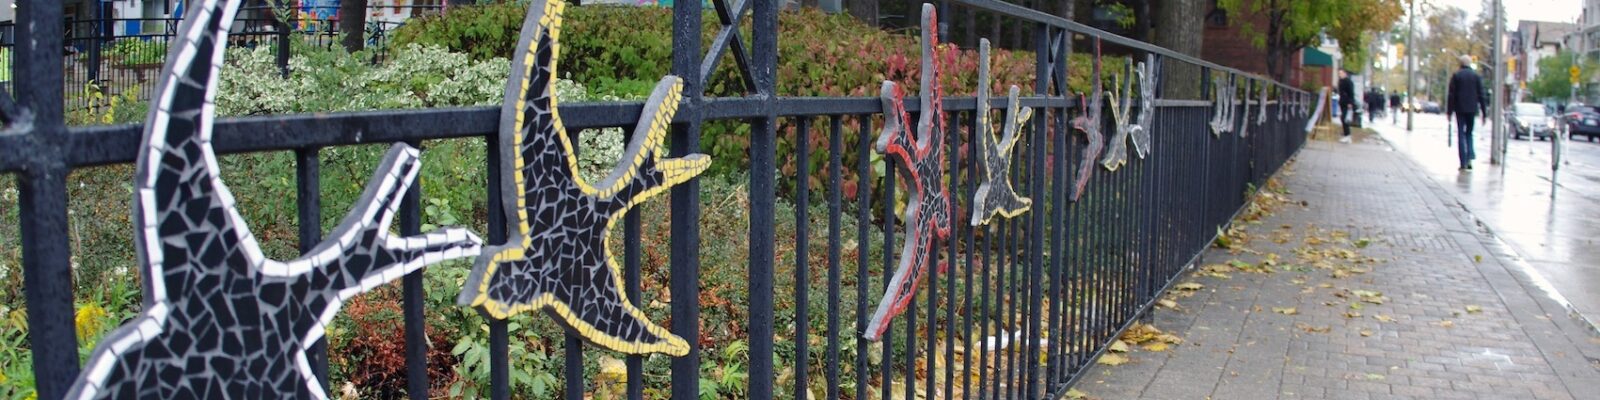 A series of ceramic and glass mosaic swallows, installed on a low black fence, recede into the distance. There are shrubs and a building in the background. On the right side of the photo, a sidewalk runs alongside the fence, and appears to narrow into the distance.